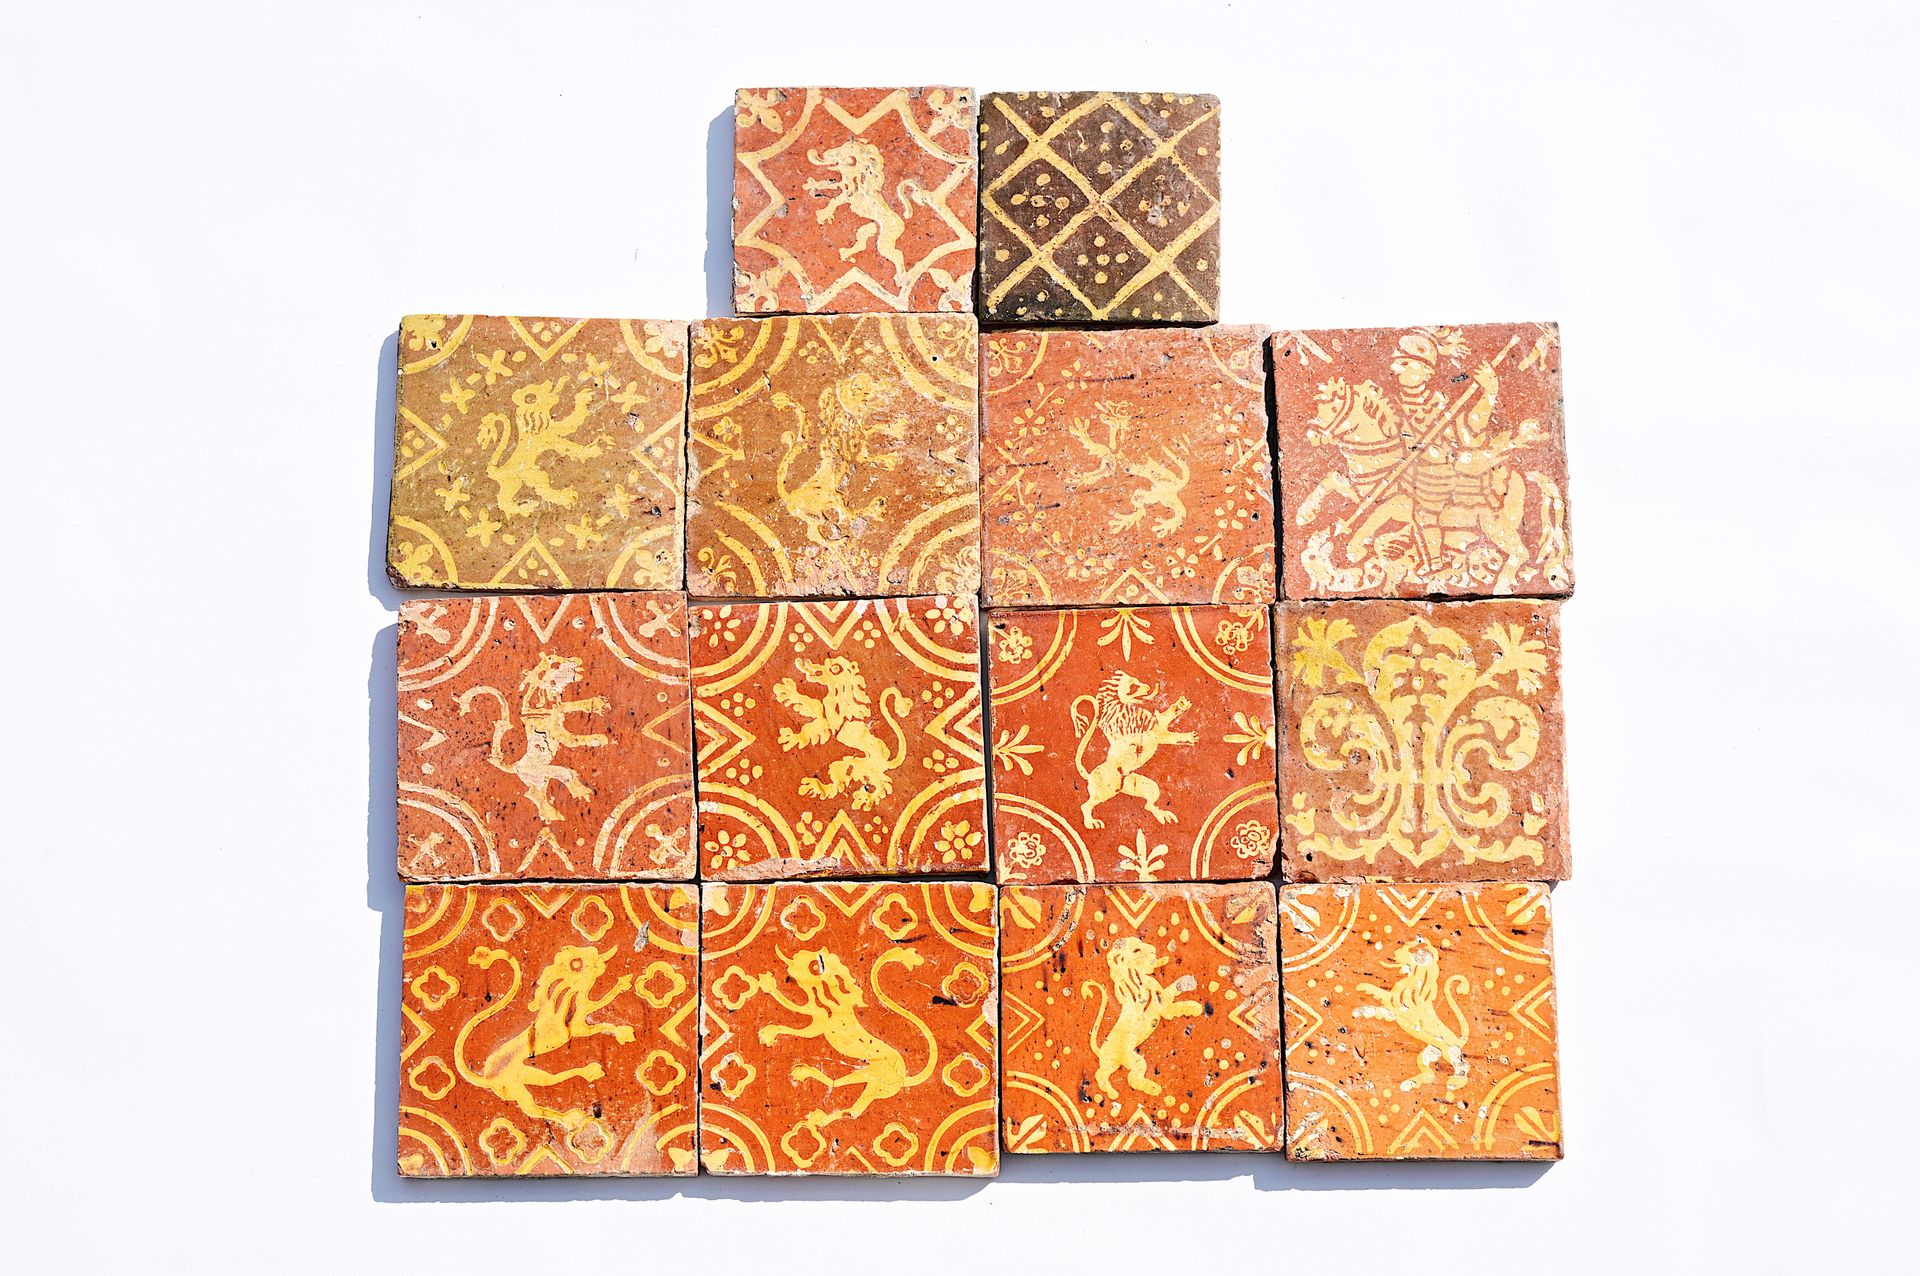 Fourteen Flemish decorated redware tiles in medieval style, 18th/19th C. Fourtee&hellip;